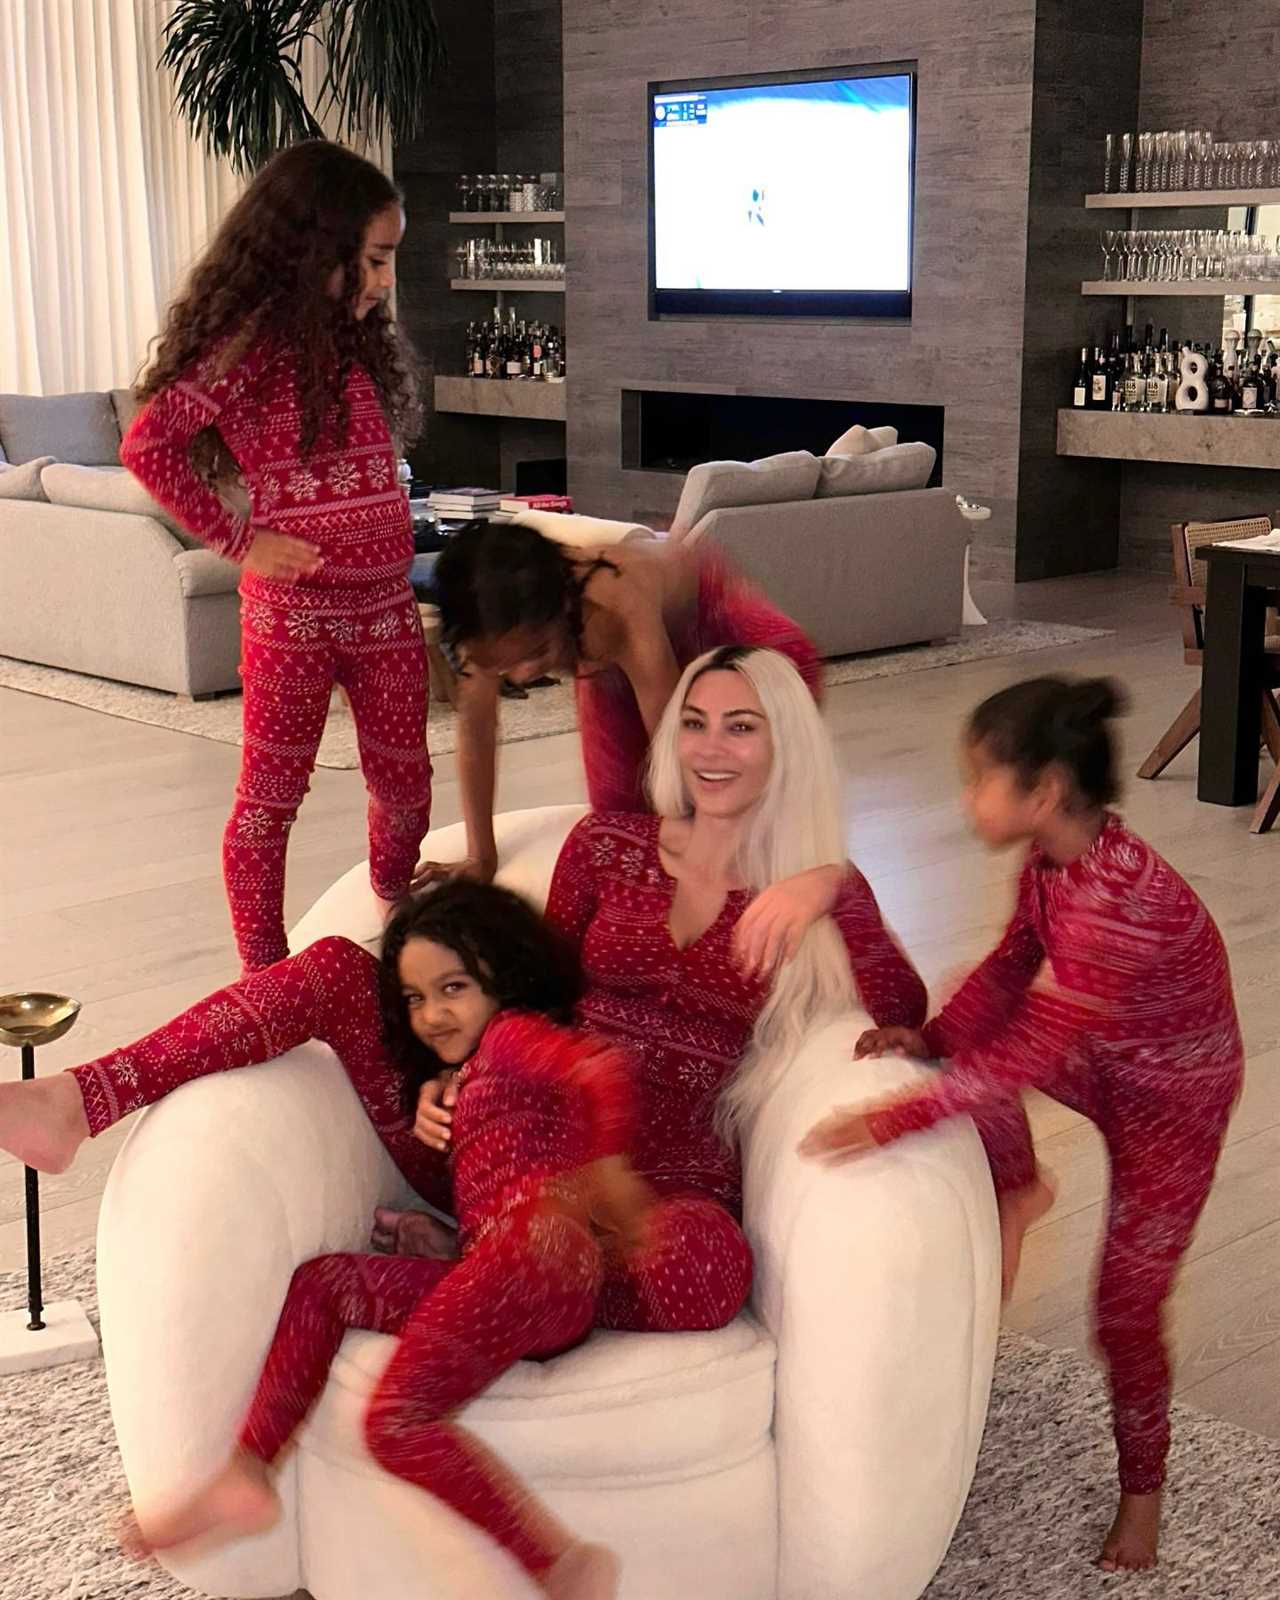 Kardashian fans share theory about why Khloe won’t allow True, 4, to sleepover at Kourtney’s house